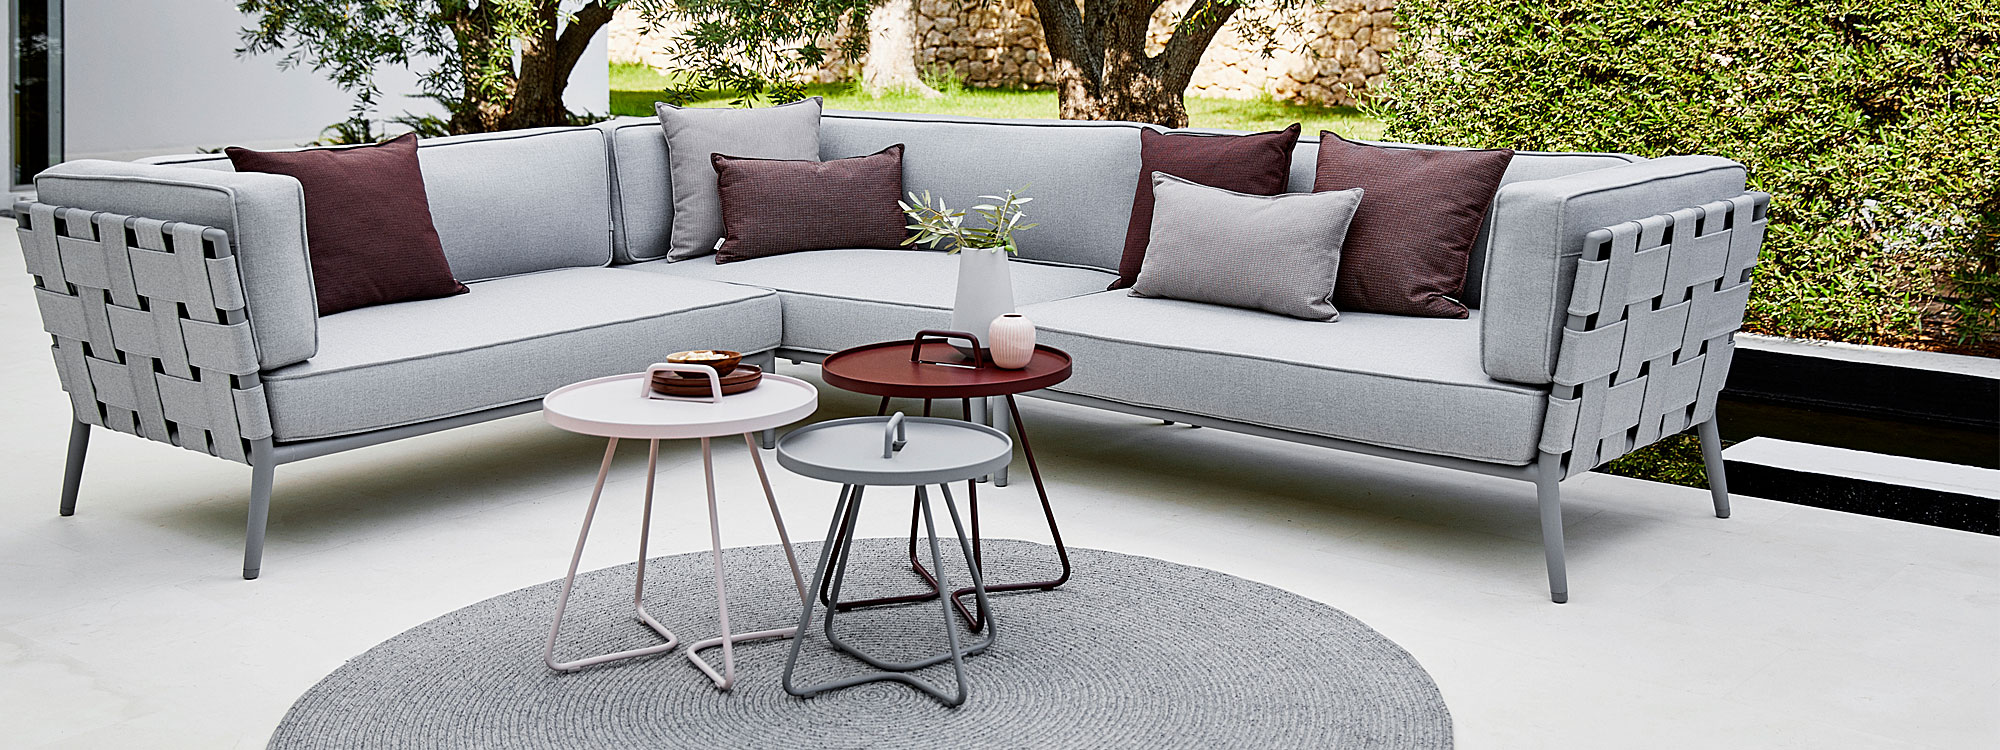 On The Move garden tray table & modern outdoor butler table is a chic side table with handle by Caneline high quality furniture company. & Conic Garden Sofa By Cane-line